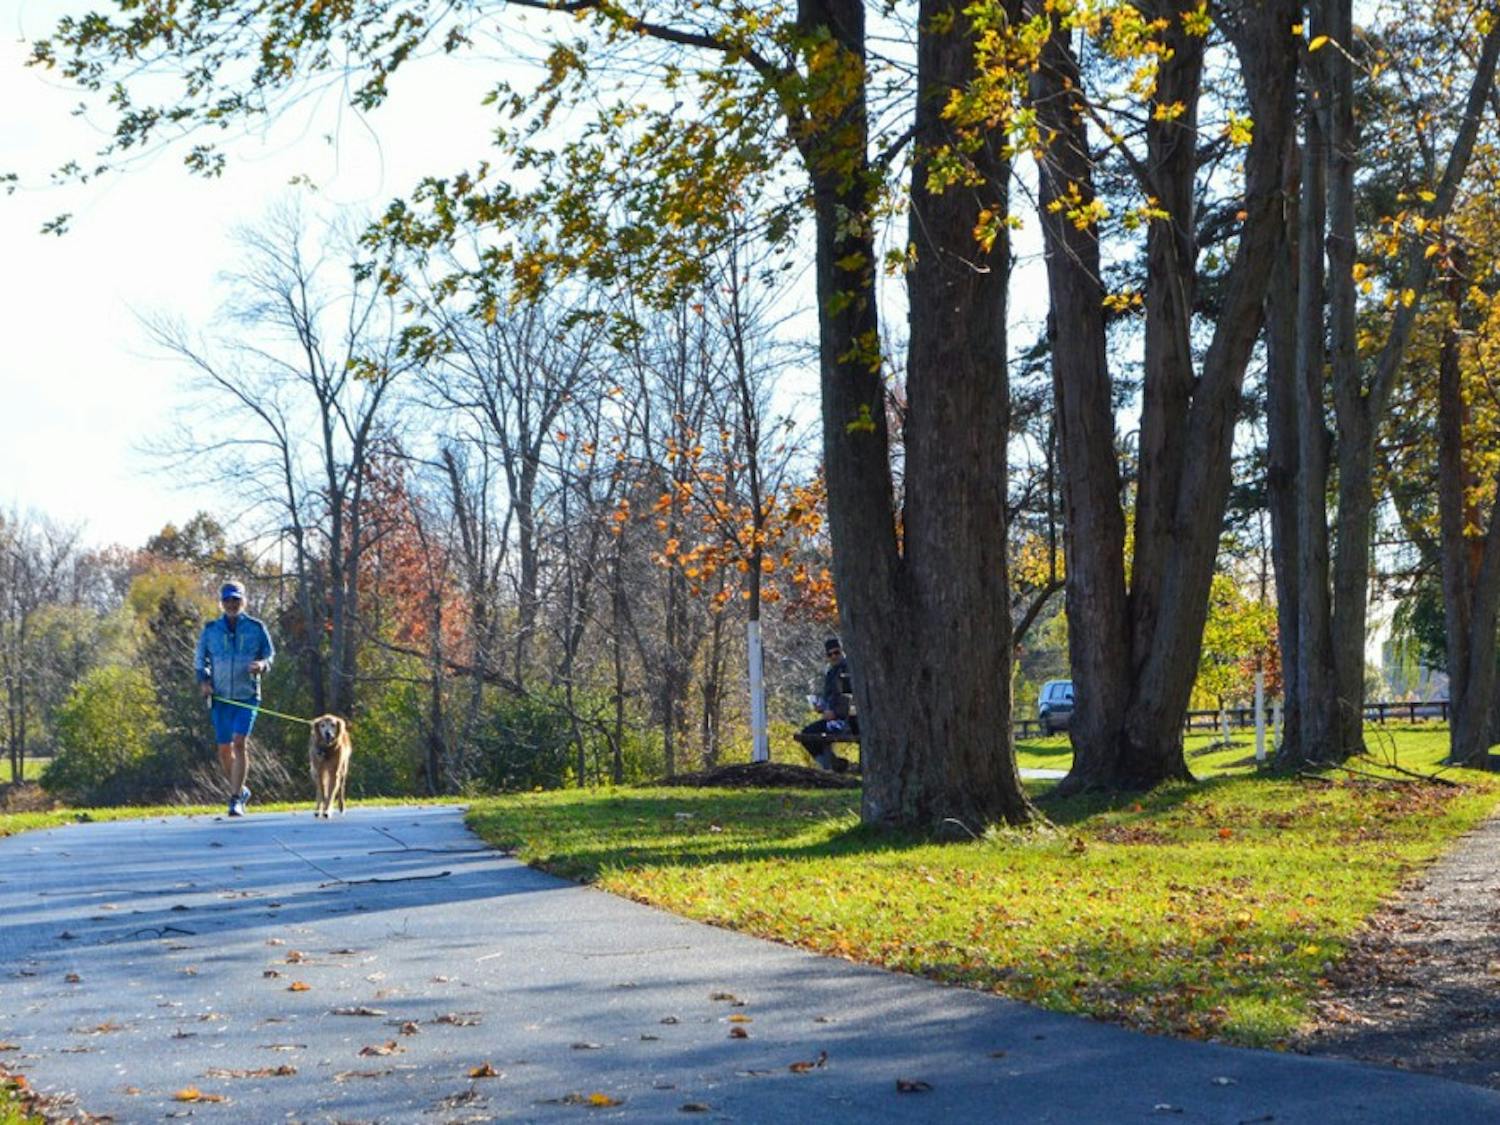 There are some beautiful places in Buffalo to explore, especially trails, since they offer the opportunity to exercise and get outside. Though some trails are intended for running, others are just part of local parks.